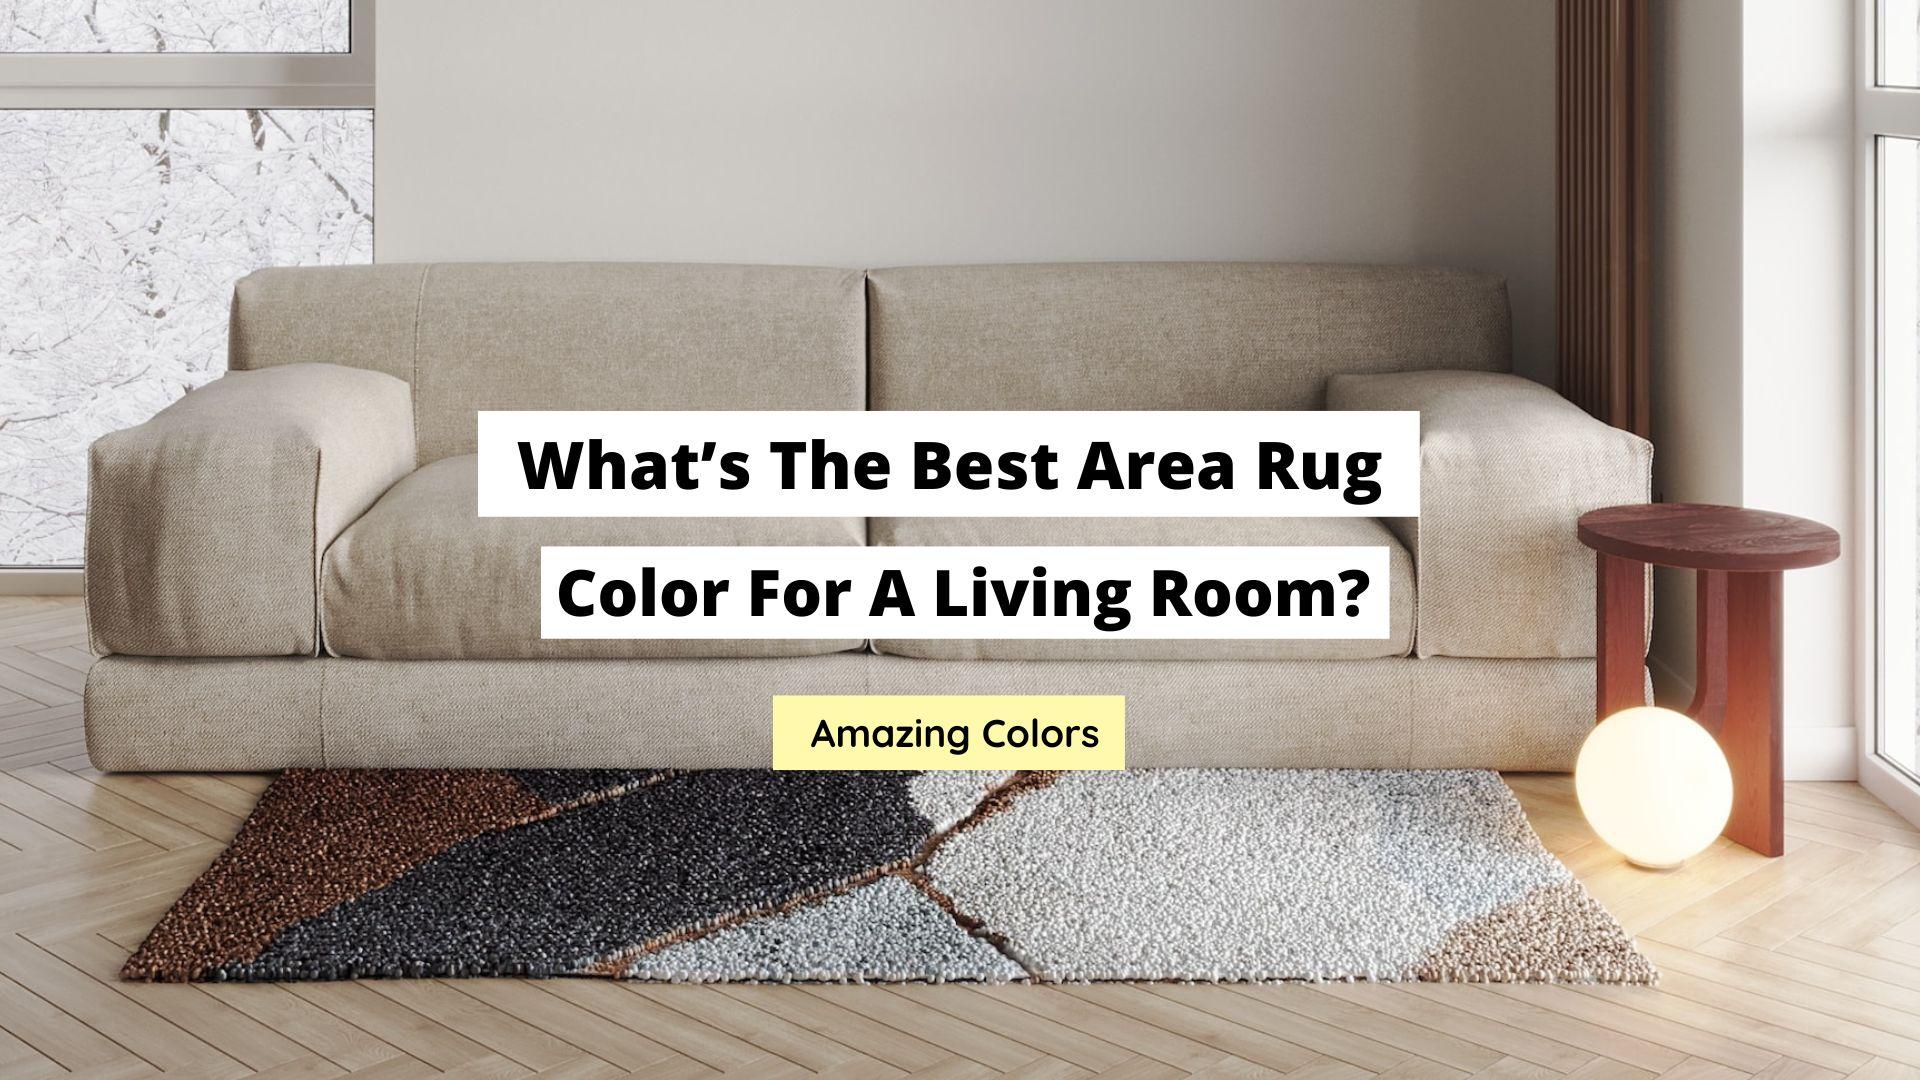 What’s The Best Area Rug Color For A Living Room